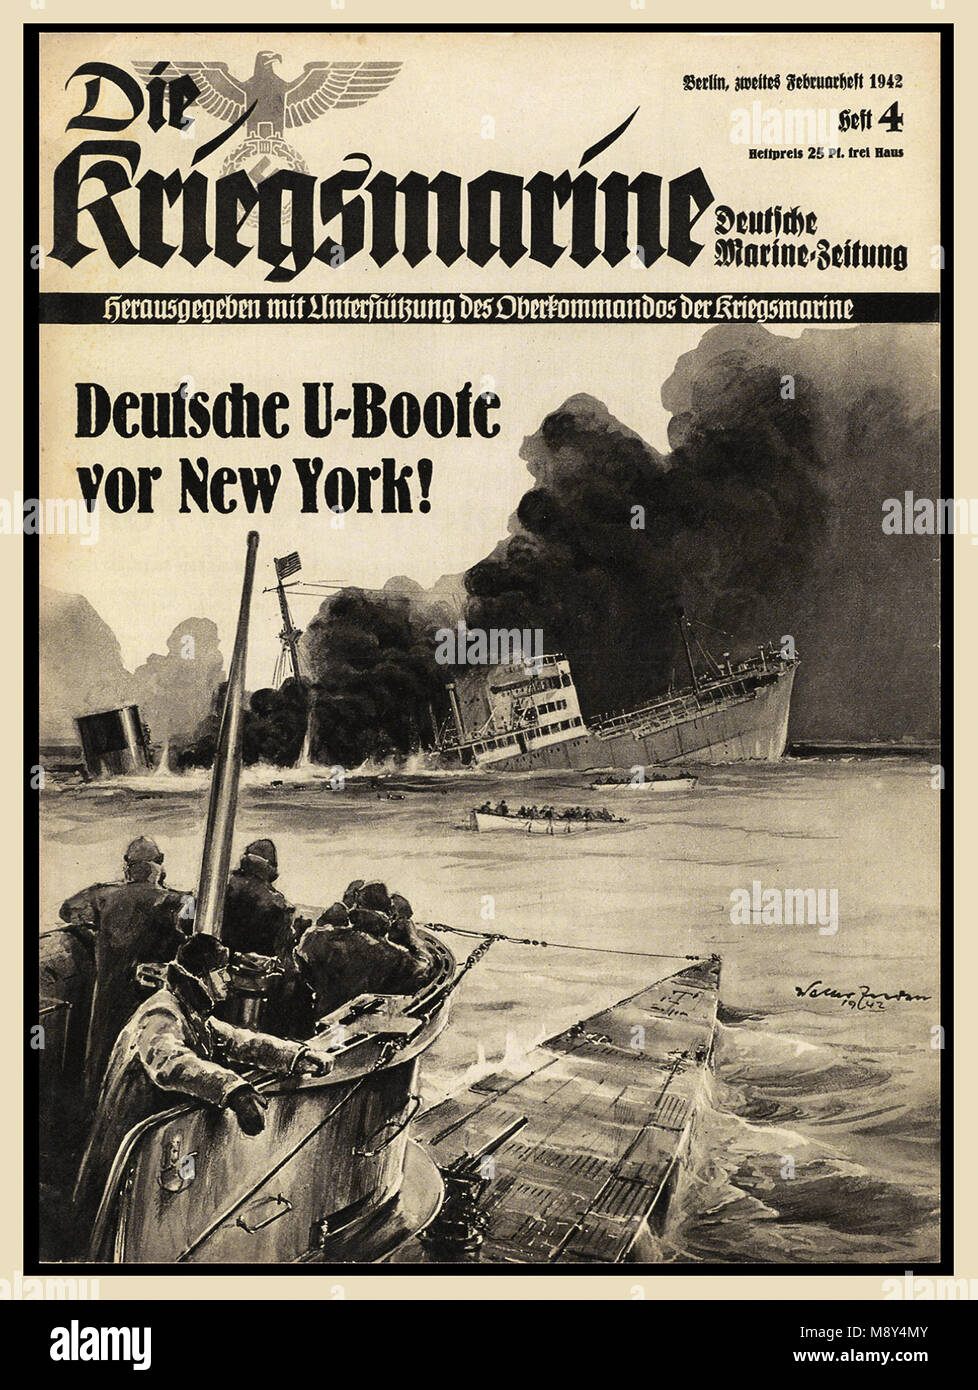 WW2 1940's Illustrated Nazi propaganda 'Kriegsmarine' magazine of the German Navy containing reports about German naval warfare. Front cover illustrates German U-boat sinking a merchant ship bound for New York USA Stock Photo